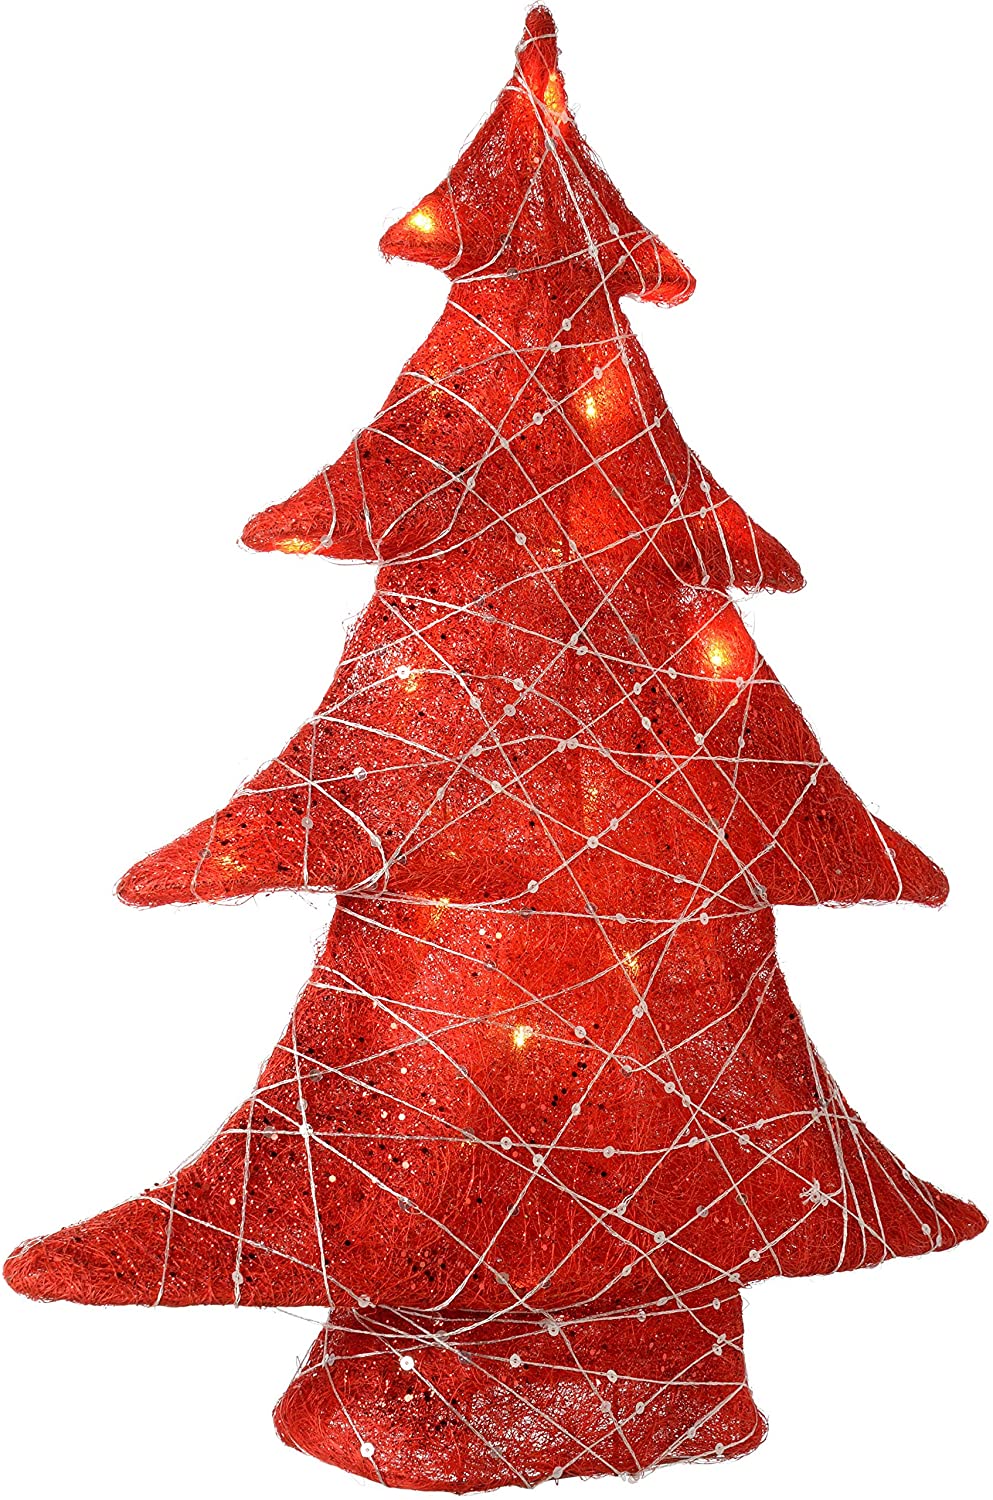 WeRChristmas 58 cm Sisal and Woven Warm White LED Christmas Tree Decorations – Red